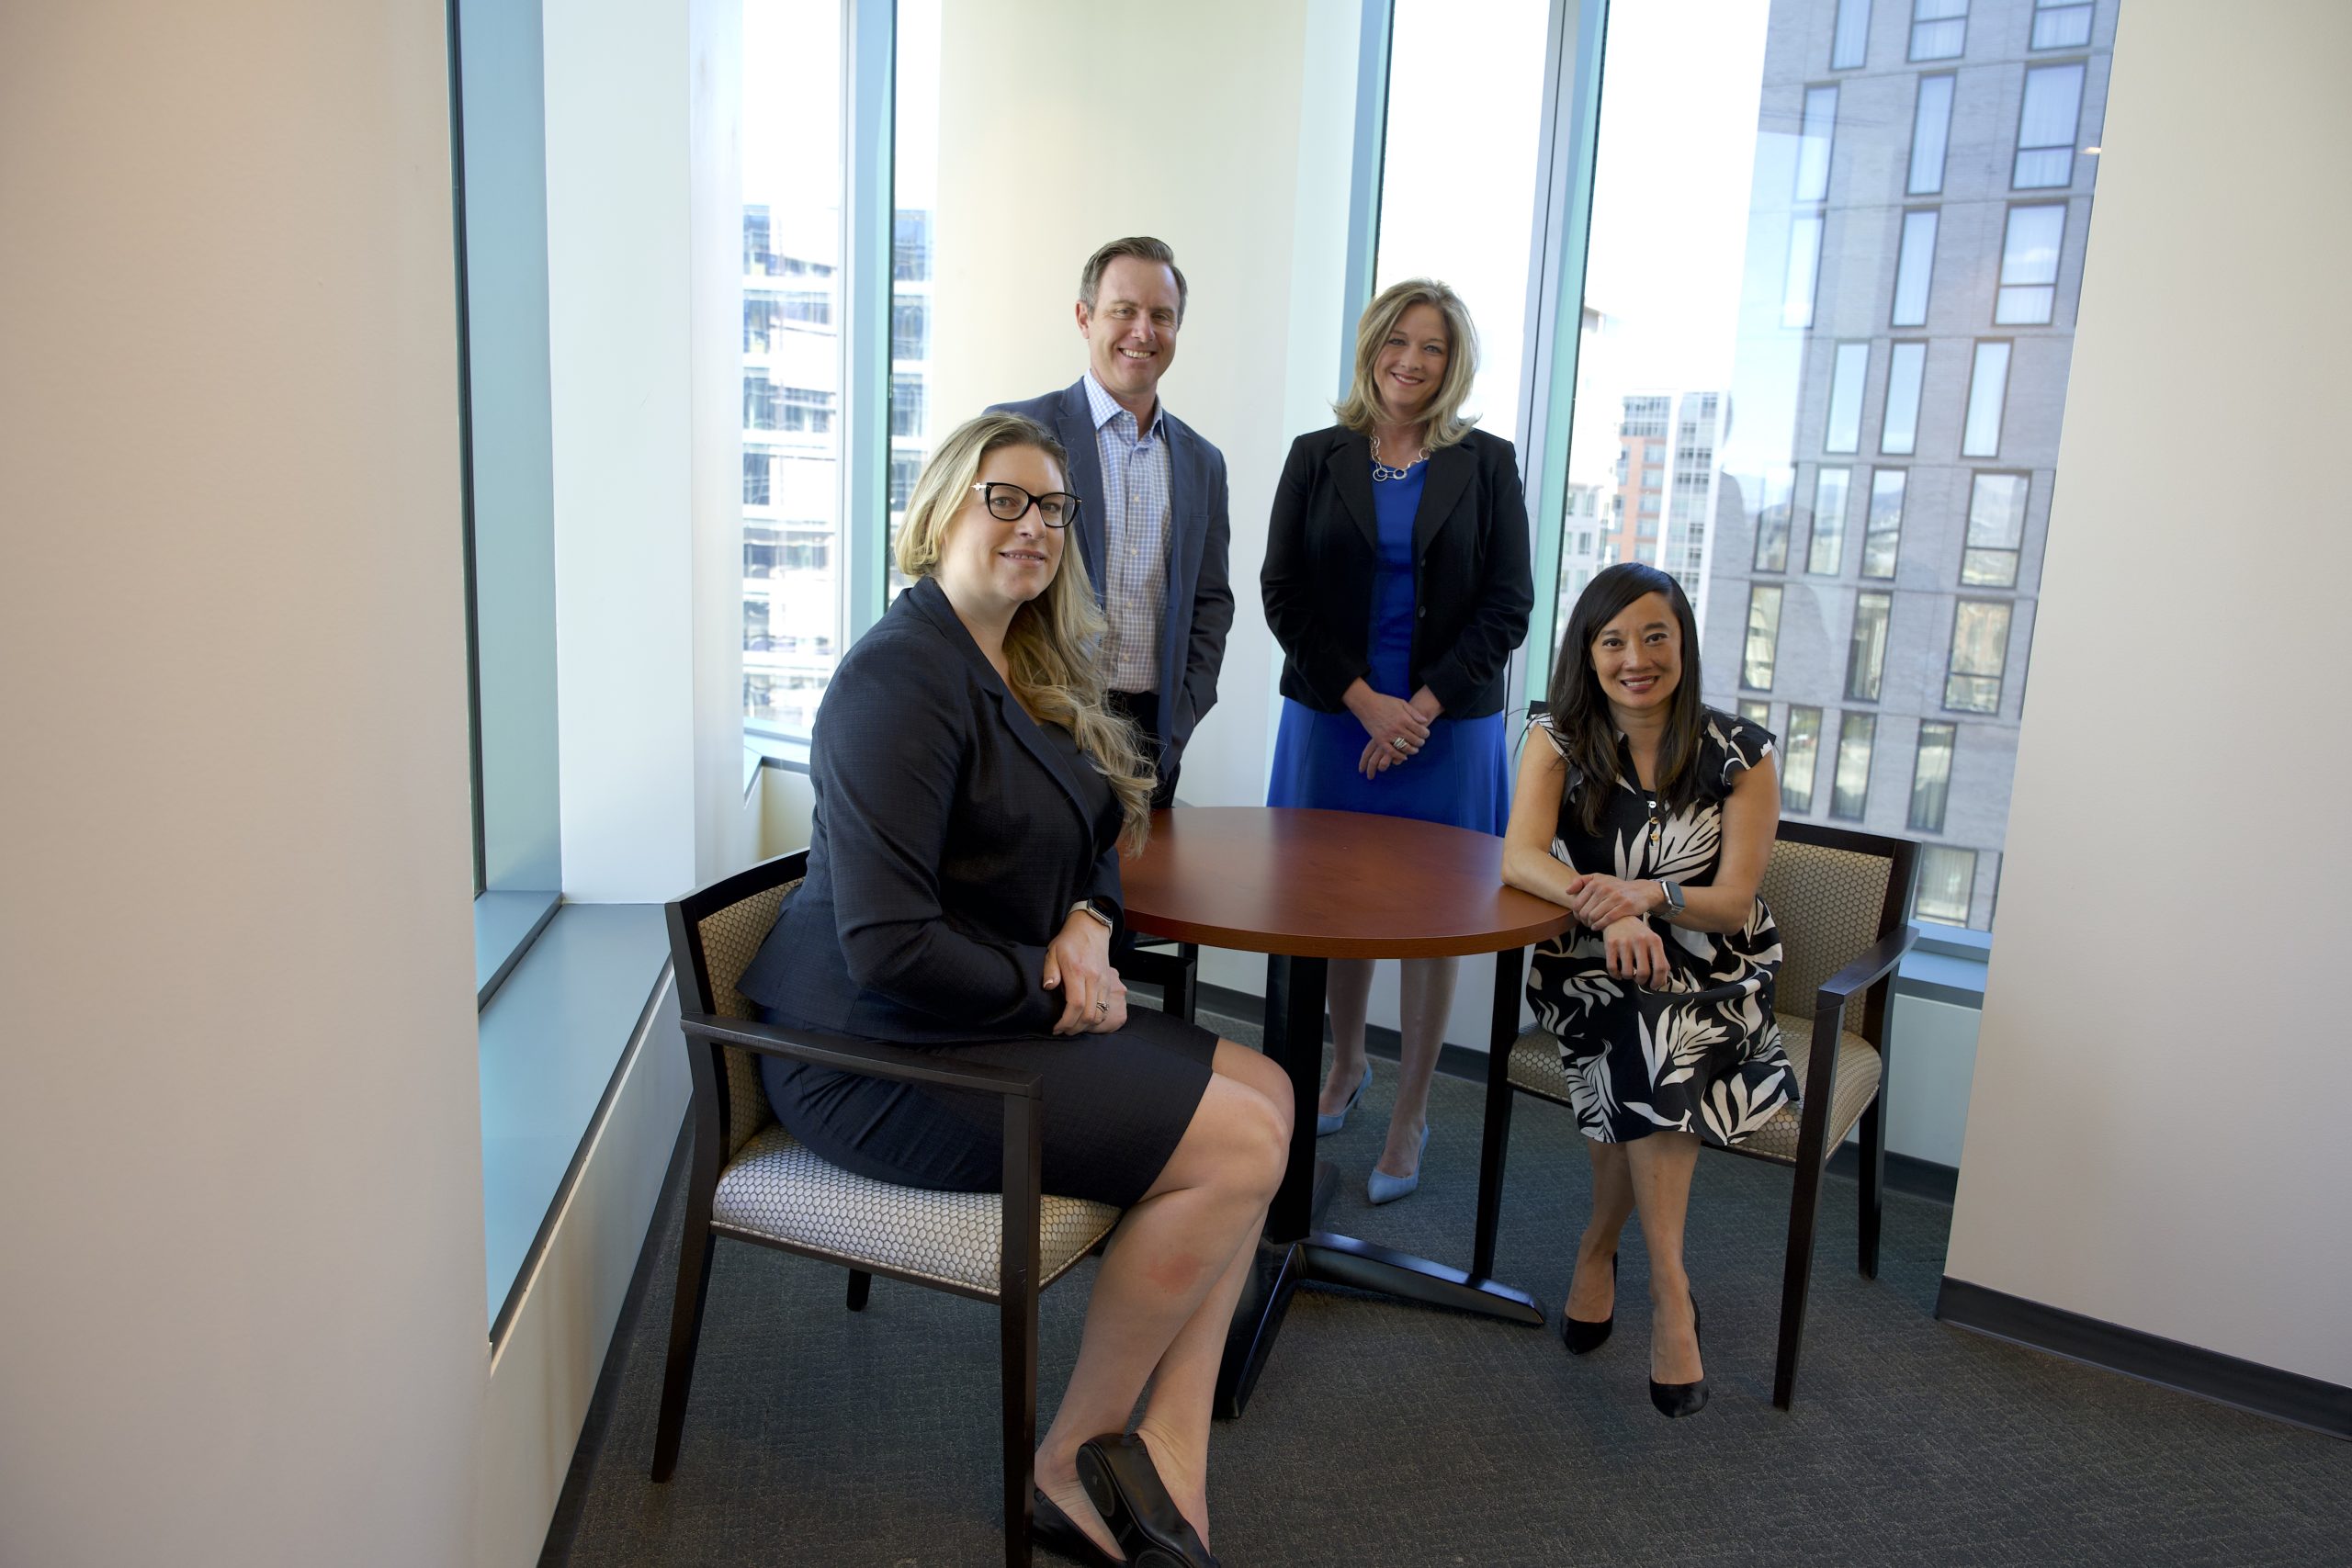 Four people dressed in professional clothes in an office building pose for a picture. On the left sitting at a small table is a blonde woman with black glasses in a suit. On the right of the table is an Asian woman with black hair in a patterned dress. Behind them on the left is a man with brown hair in a gray suit. On the right is a blonde woman in a blue dress and a black blazer. 